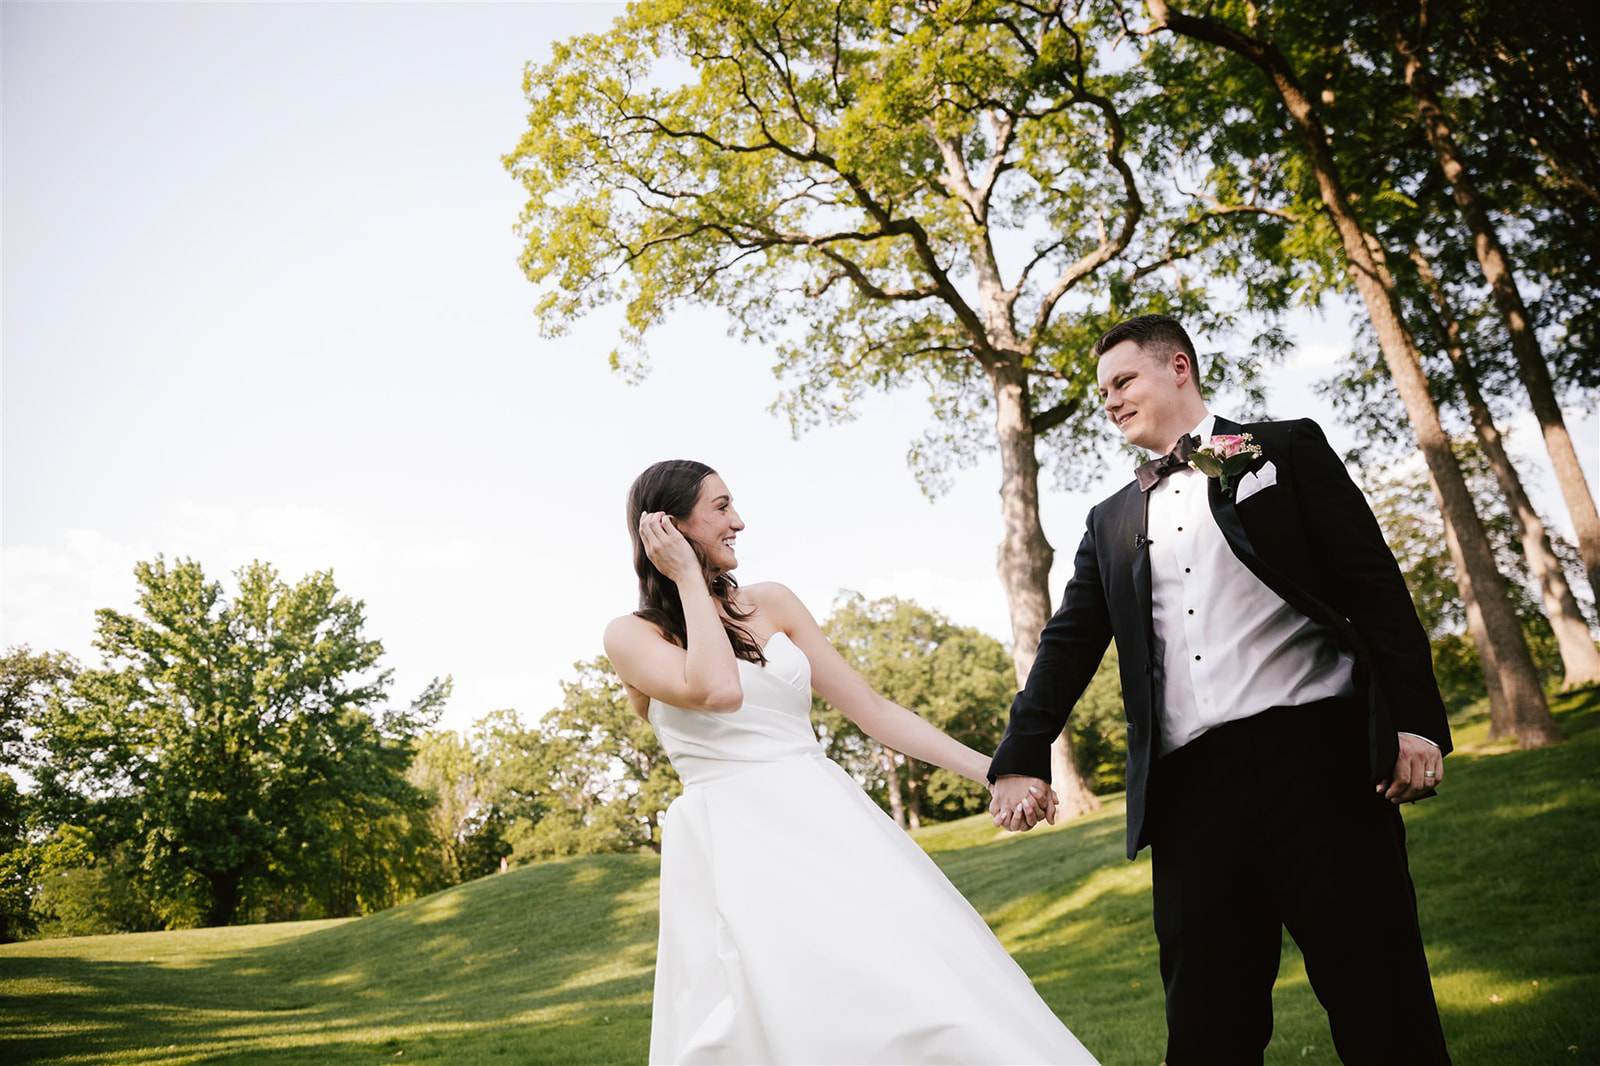 Candid portraits capturing the genuine emotions and joyful moments of the bride and groom in the warm glow of sunset.